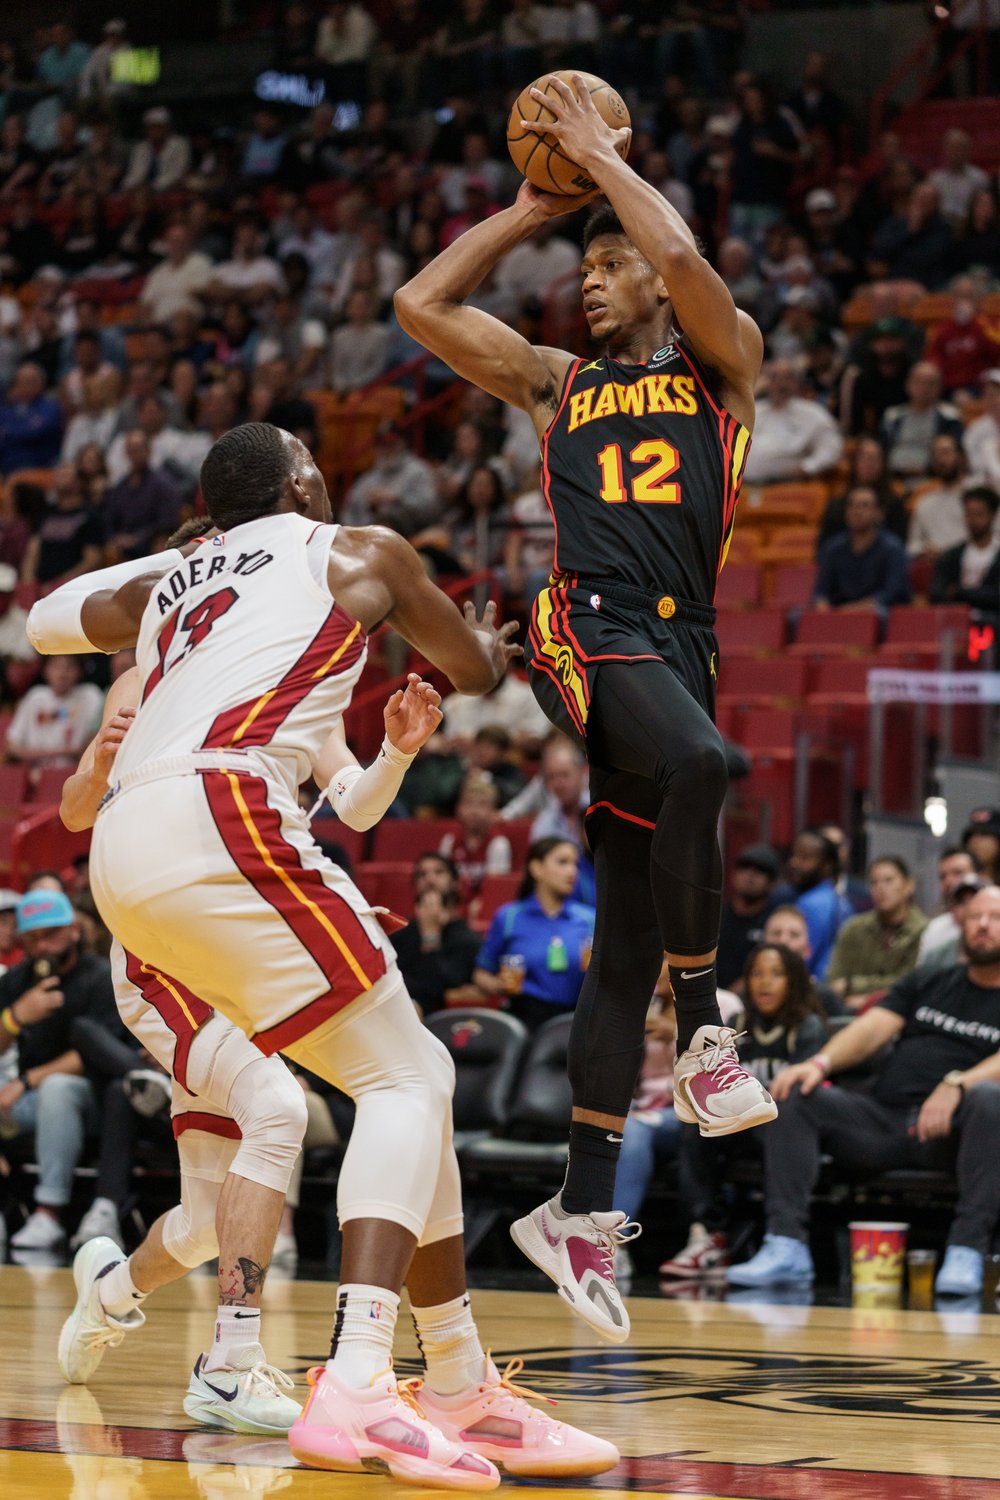  MIAMI, FL - APRIL 11: De'Andre Hunter #12 of the Atlanta Hawks passes the ball while being guarded by Bam Adebayo #13 of the Miami Heat at Kaseya Center on April 11, 2023 in Miami, Florida. 